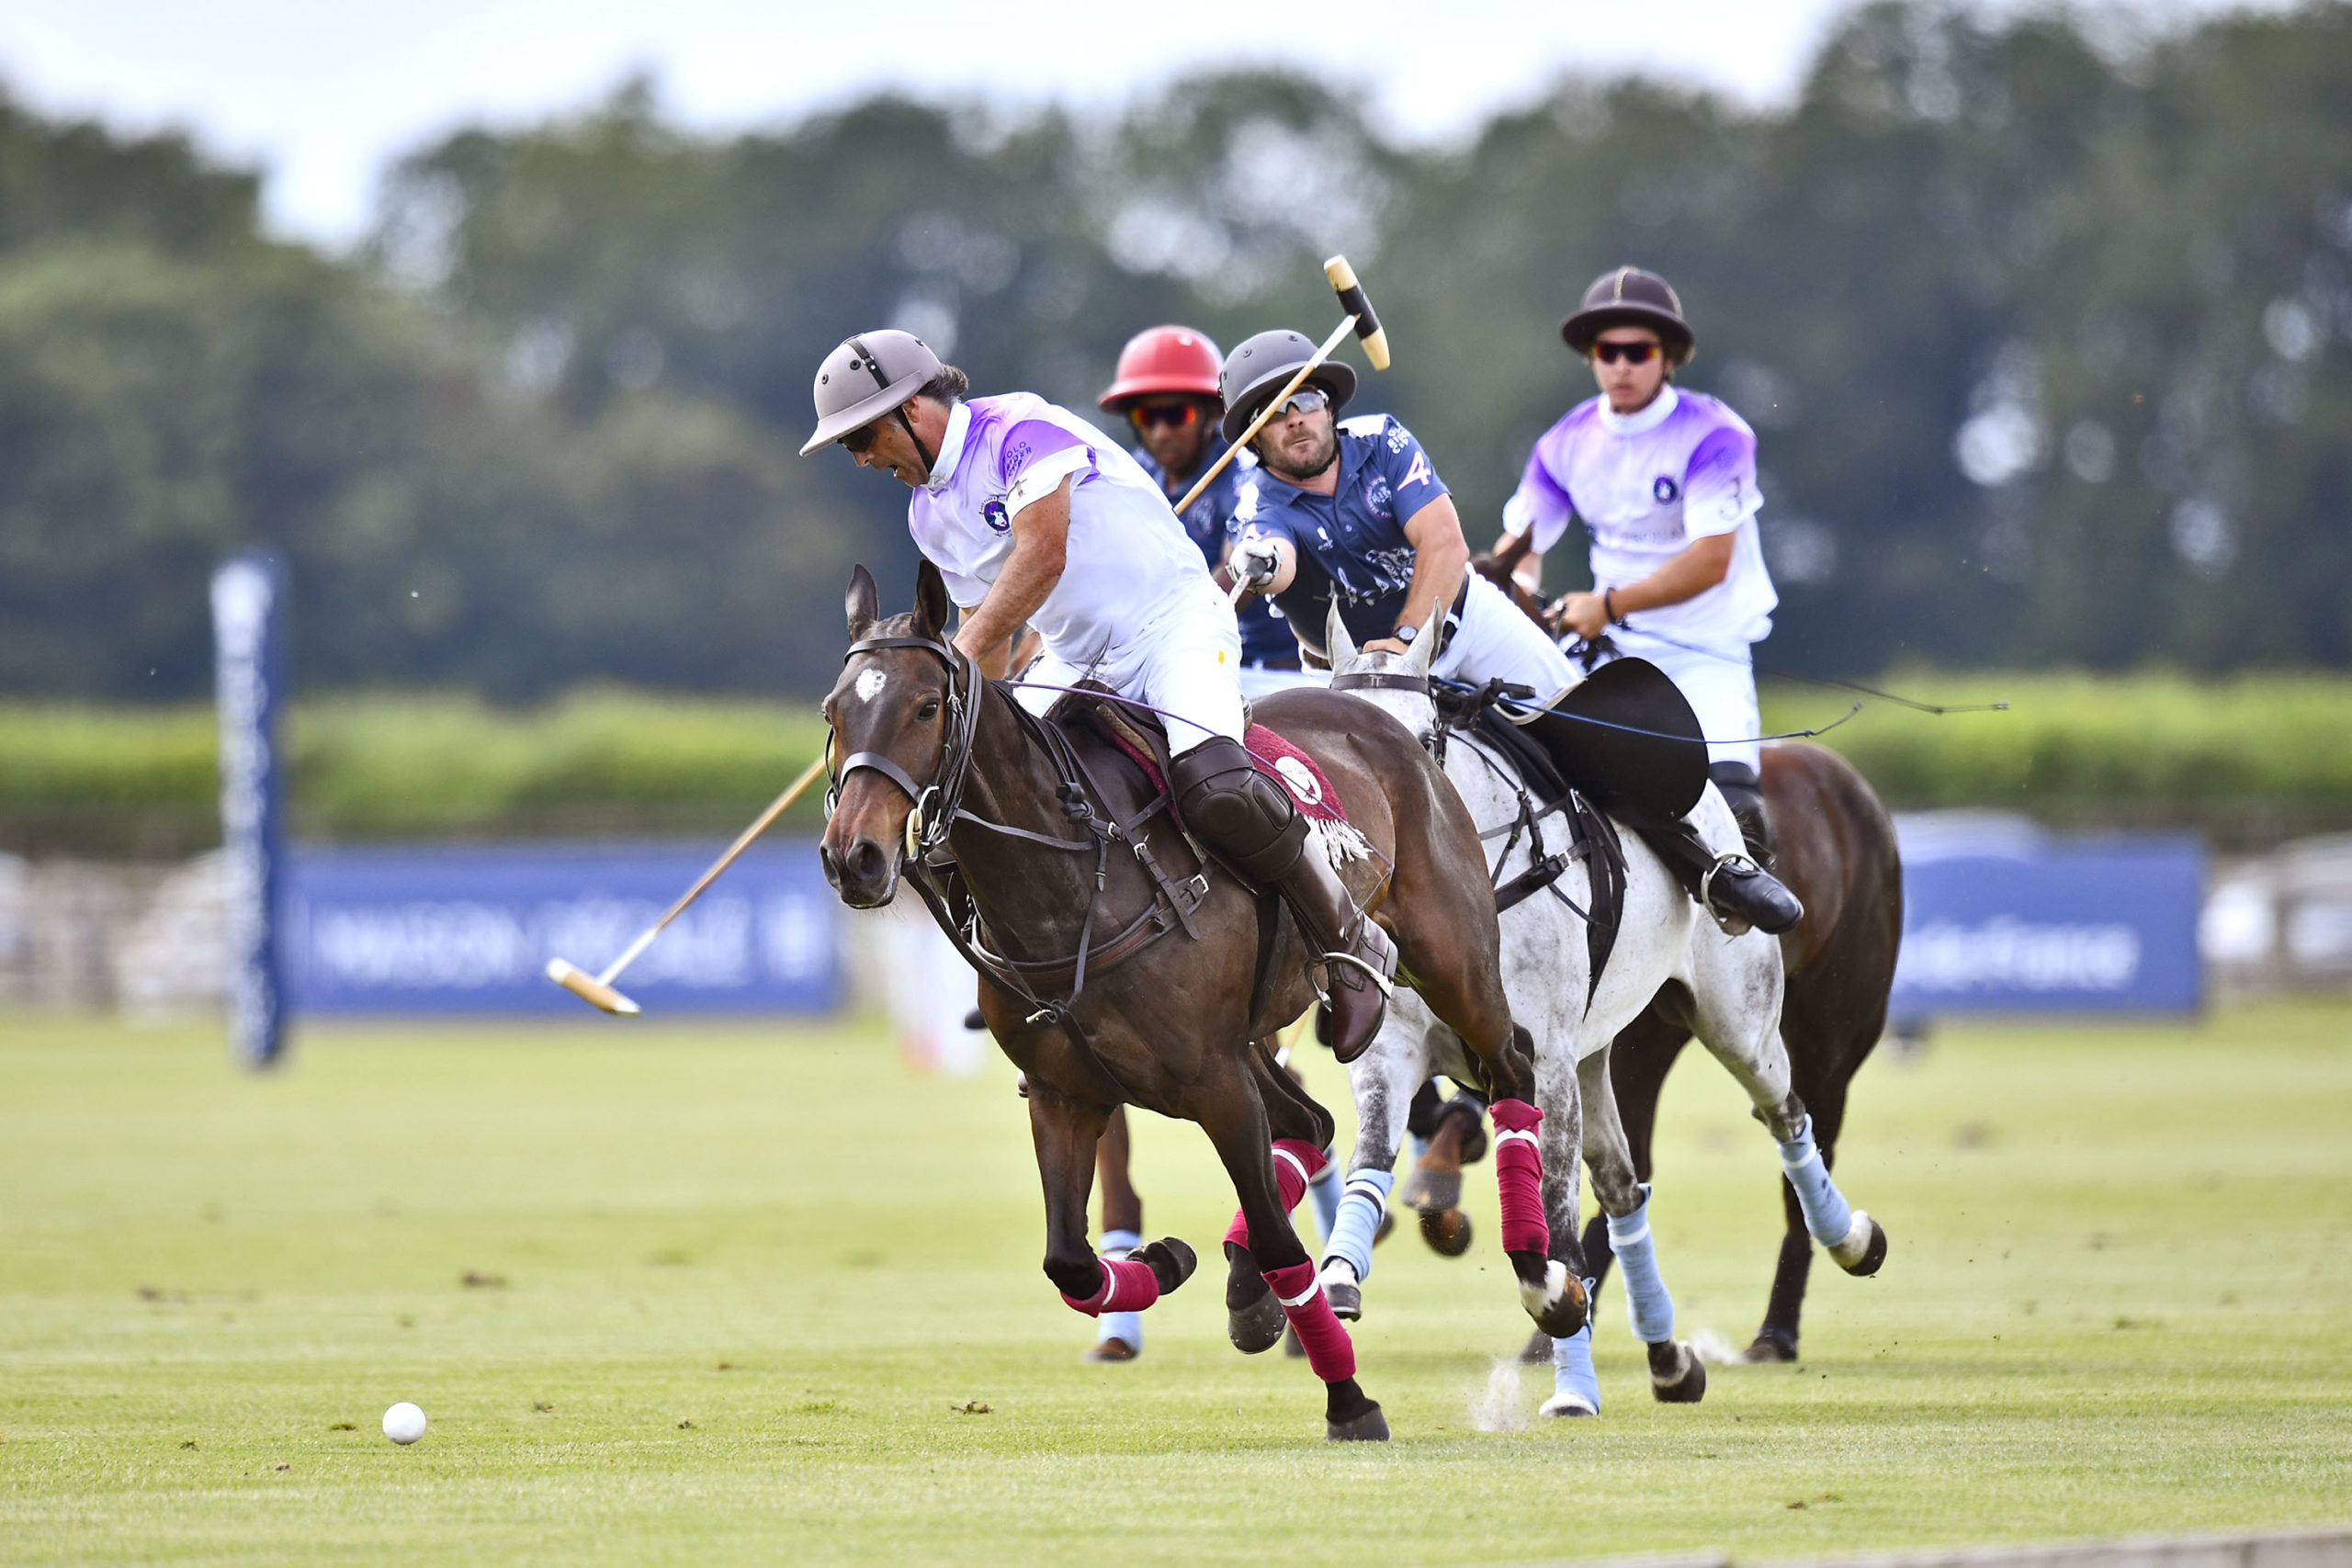 PoloLine.TV Highlights Polo Rider Cup Final